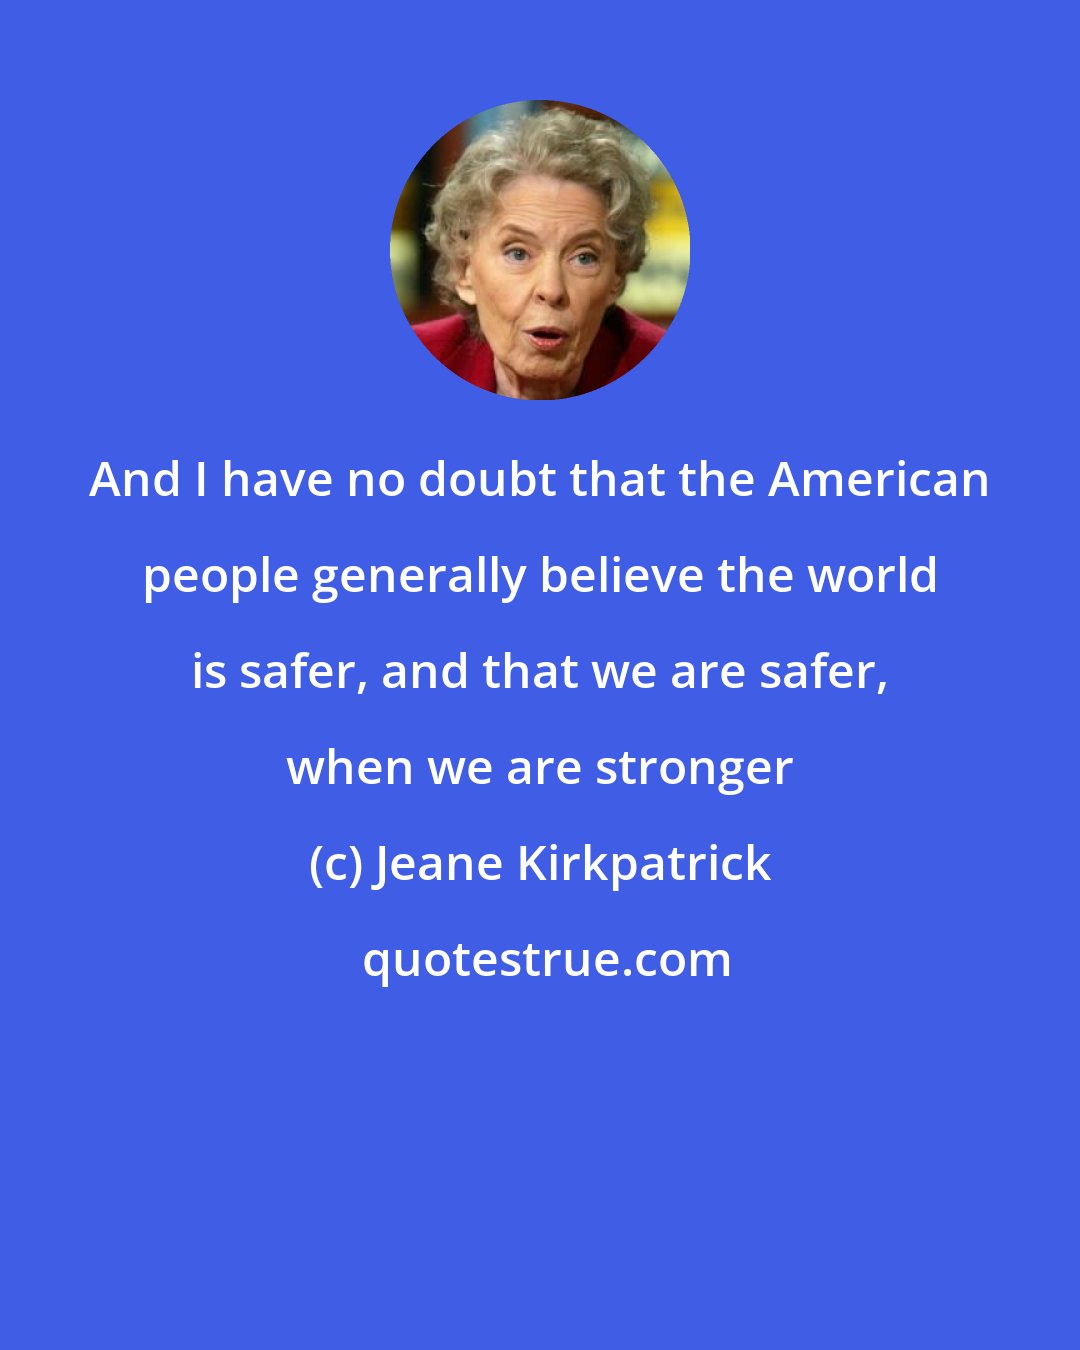 Jeane Kirkpatrick: And I have no doubt that the American people generally believe the world is safer, and that we are safer, when we are stronger